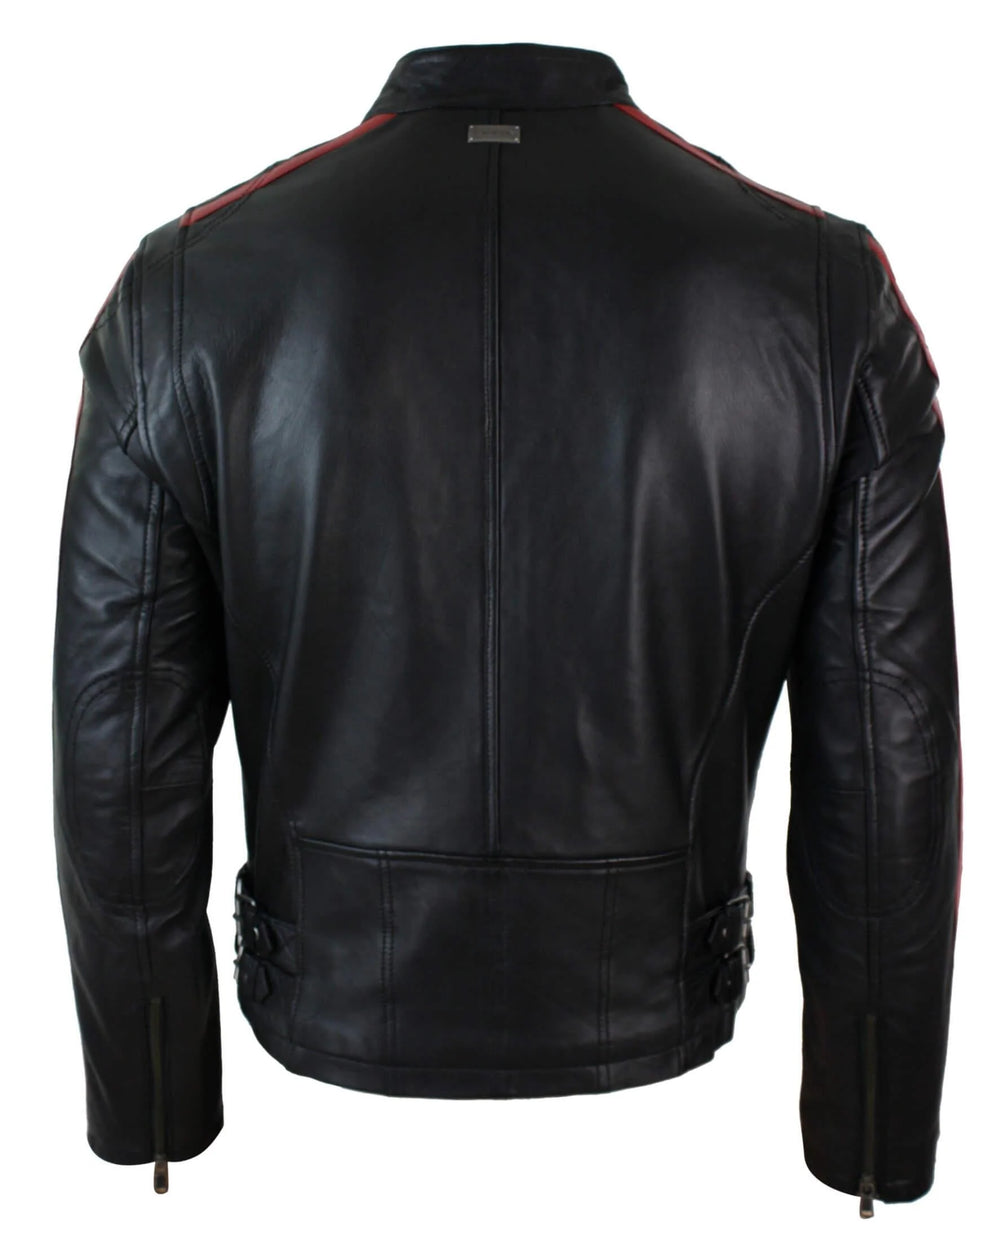 Slim Fit Short Real Leather Men's Biker Racing Jacket With Stripes Sleeves| All For Me Today